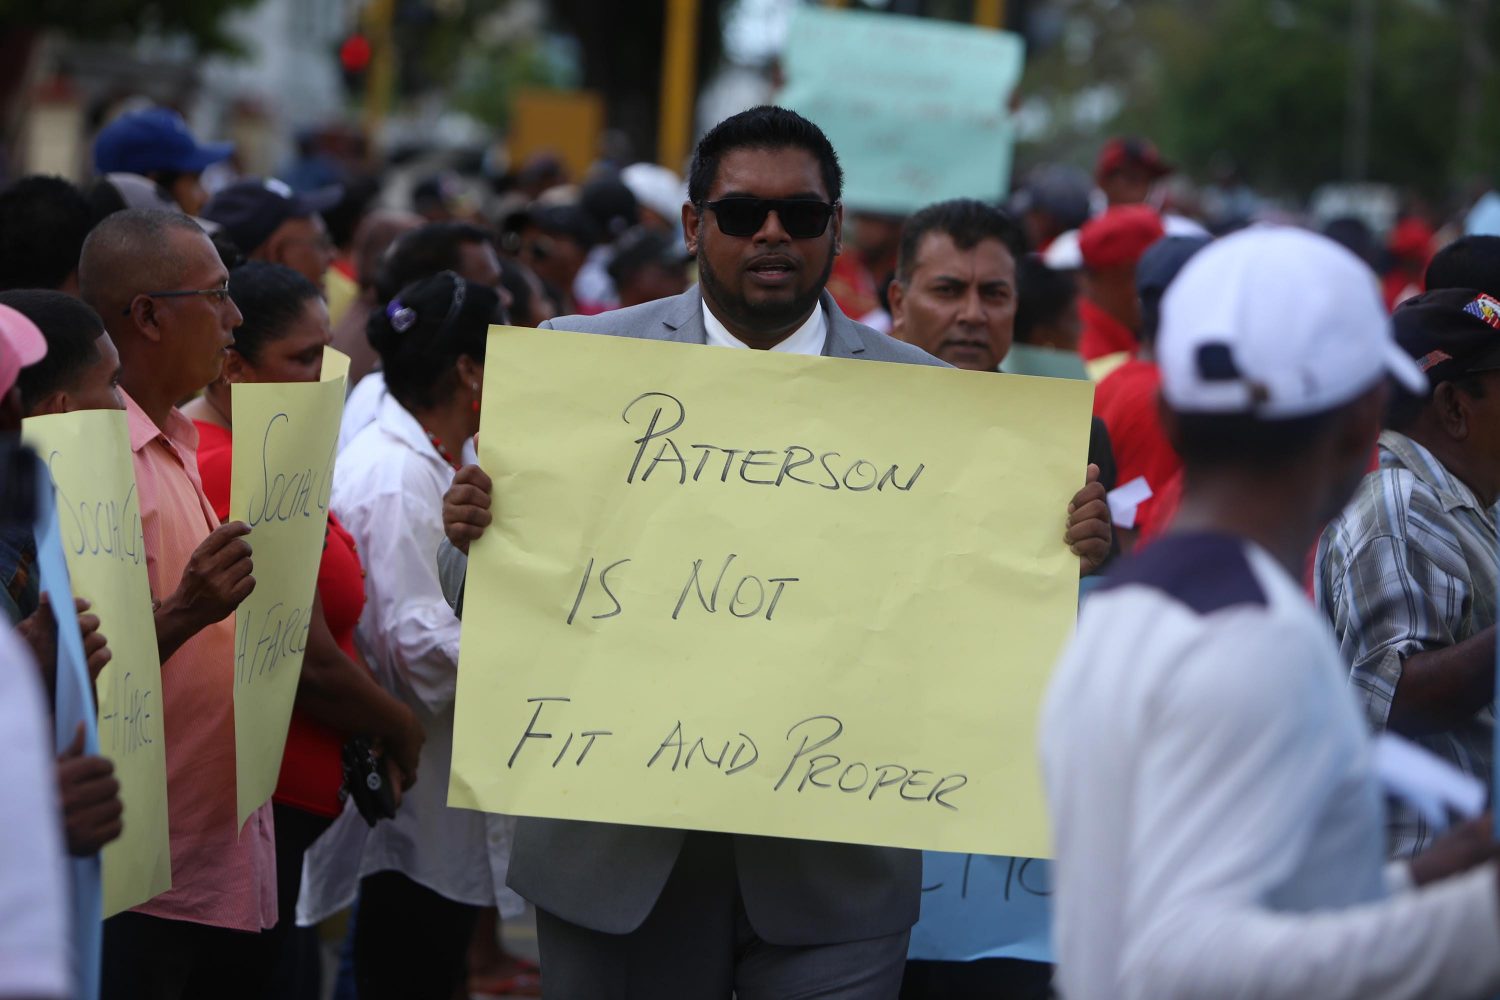 PPP/C Member of Parliament Irfaan Ali carried a placard, which reads “Patterson is not fit and proper” during the protest outside of the Public Buildings yesterday. 